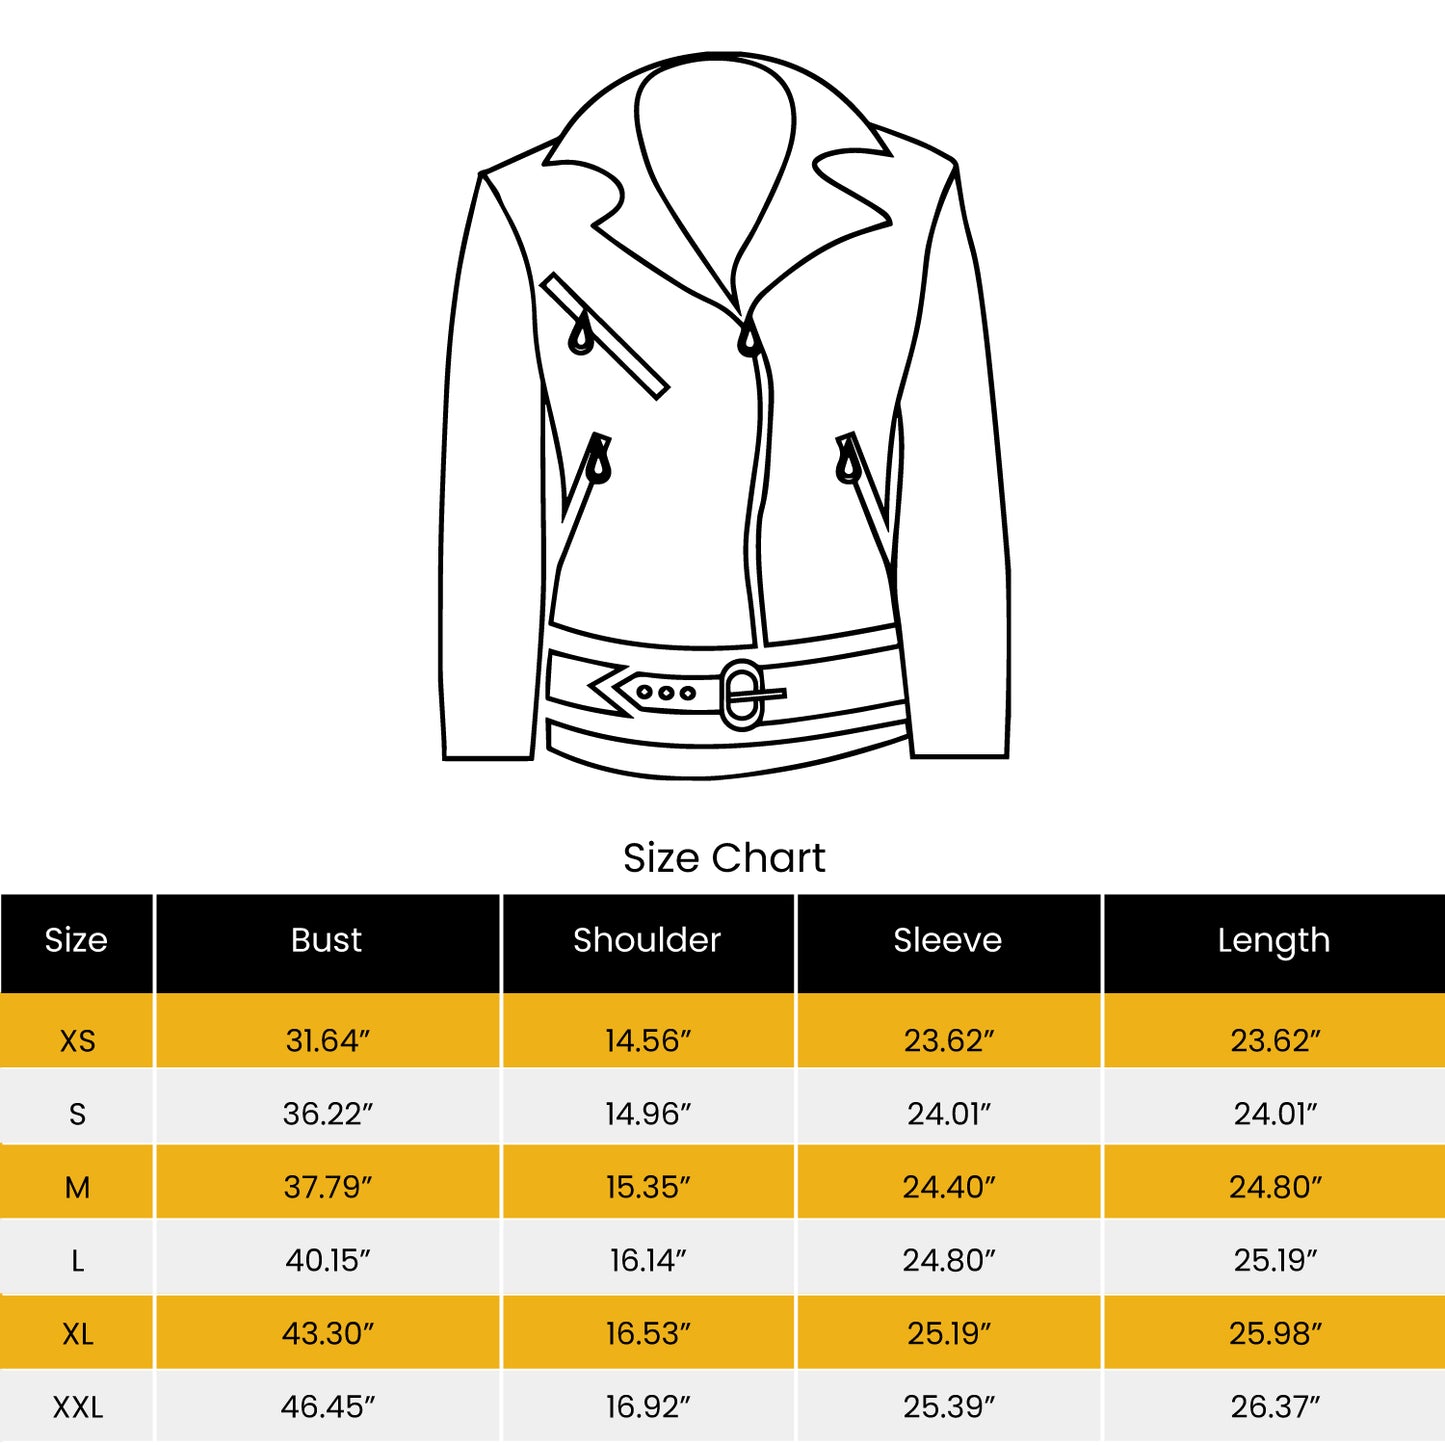 Women’s Turquoise Blue Genuine Sheepskin Fashionable Sporty Baseball Collar Casual Outfit Zip-up Lightweight Rib Knit Bomber Leather Jacket